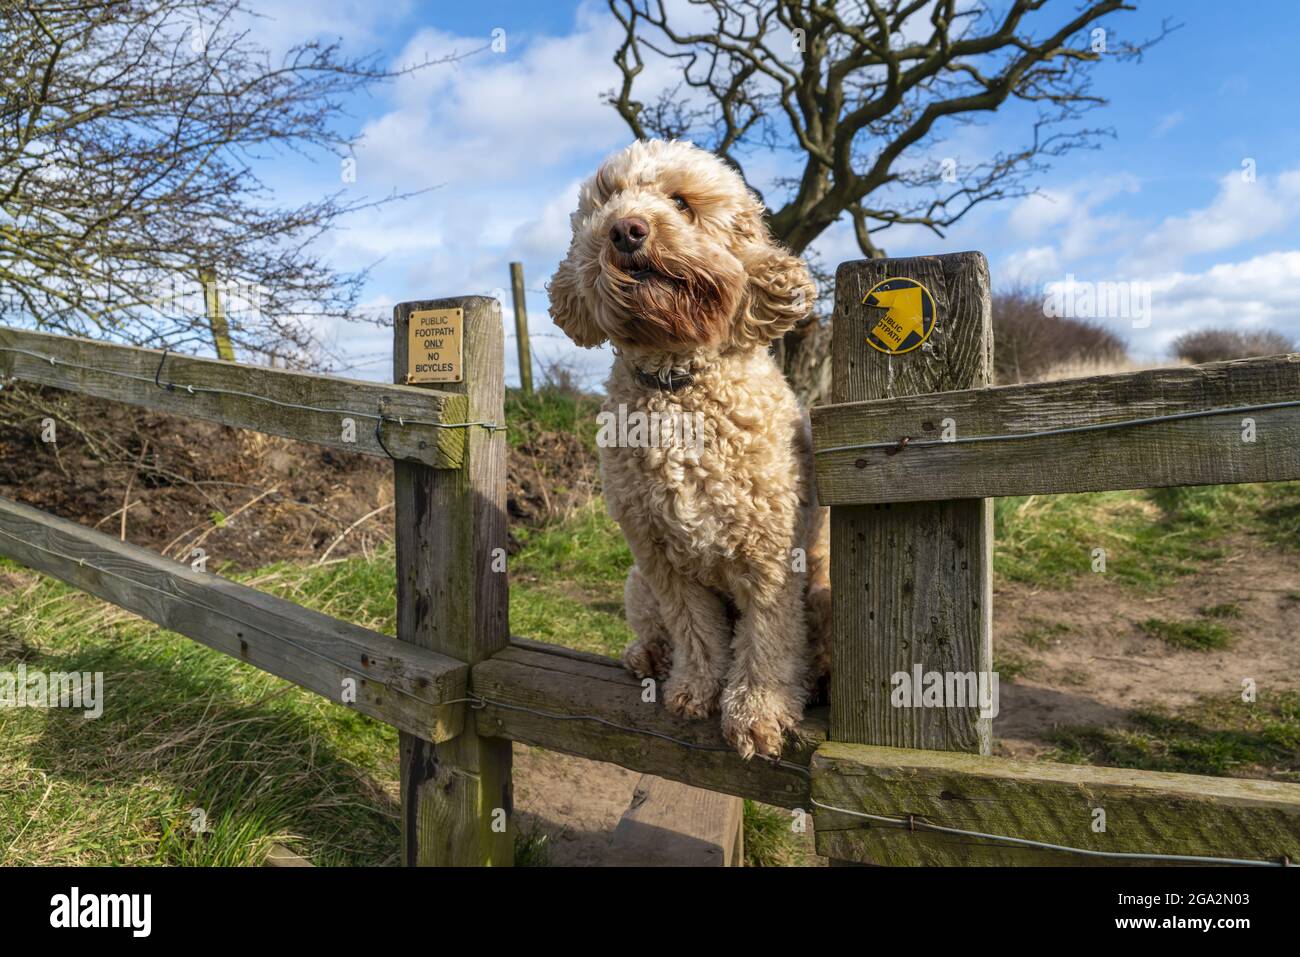 Cockapoo dog standing on a wooden fence along a hiking trail in Cleadon Hills; South Shields, Tyne and Wear, England Stock Photo